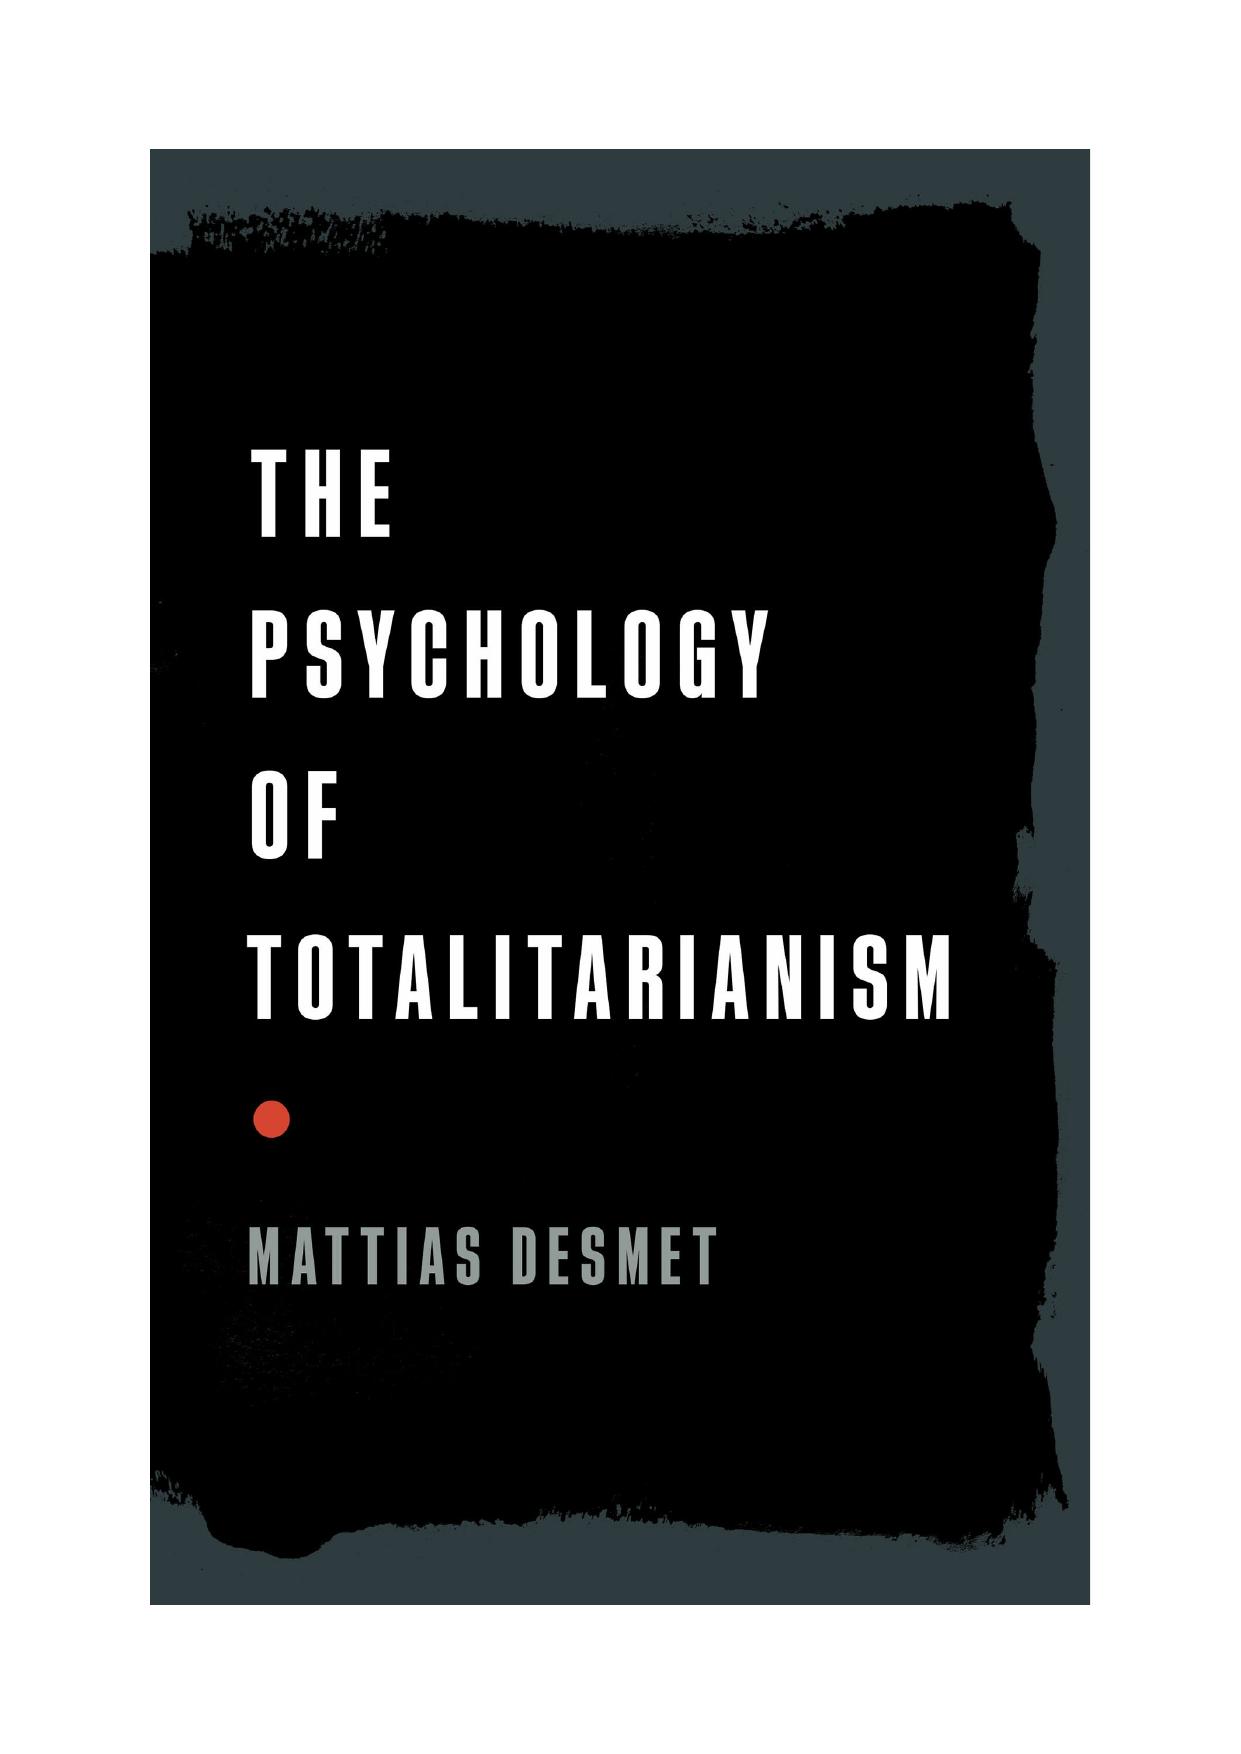 The Psychology of Totalitarianism by Mattias Desmet